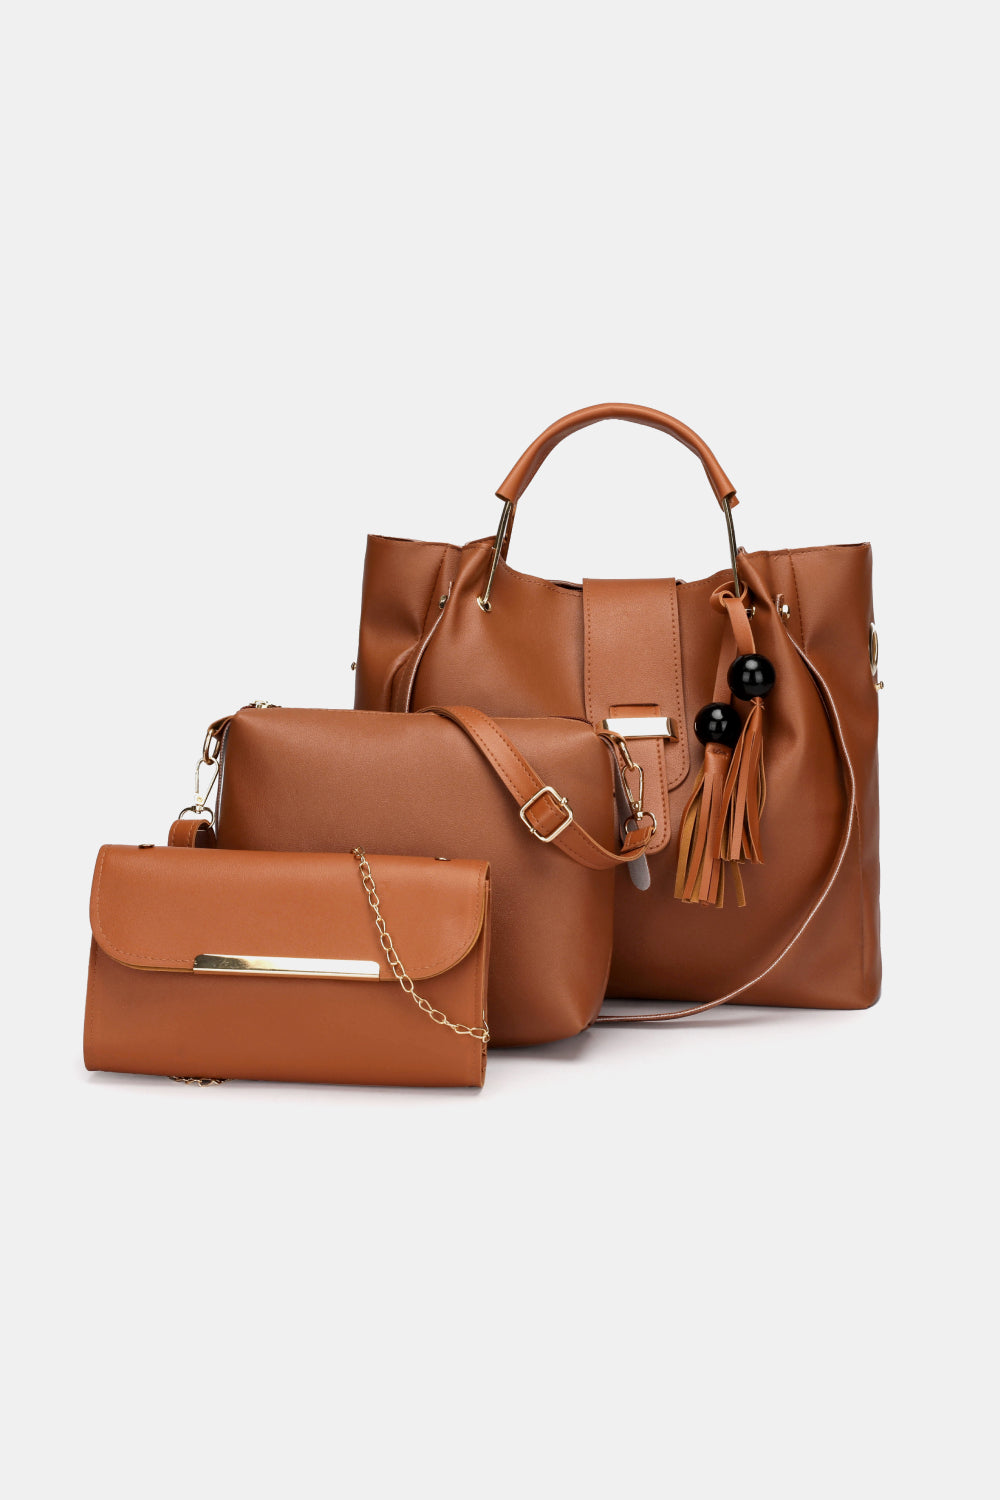 3-Piece PU Leather Bag Set [Additional Options Available]